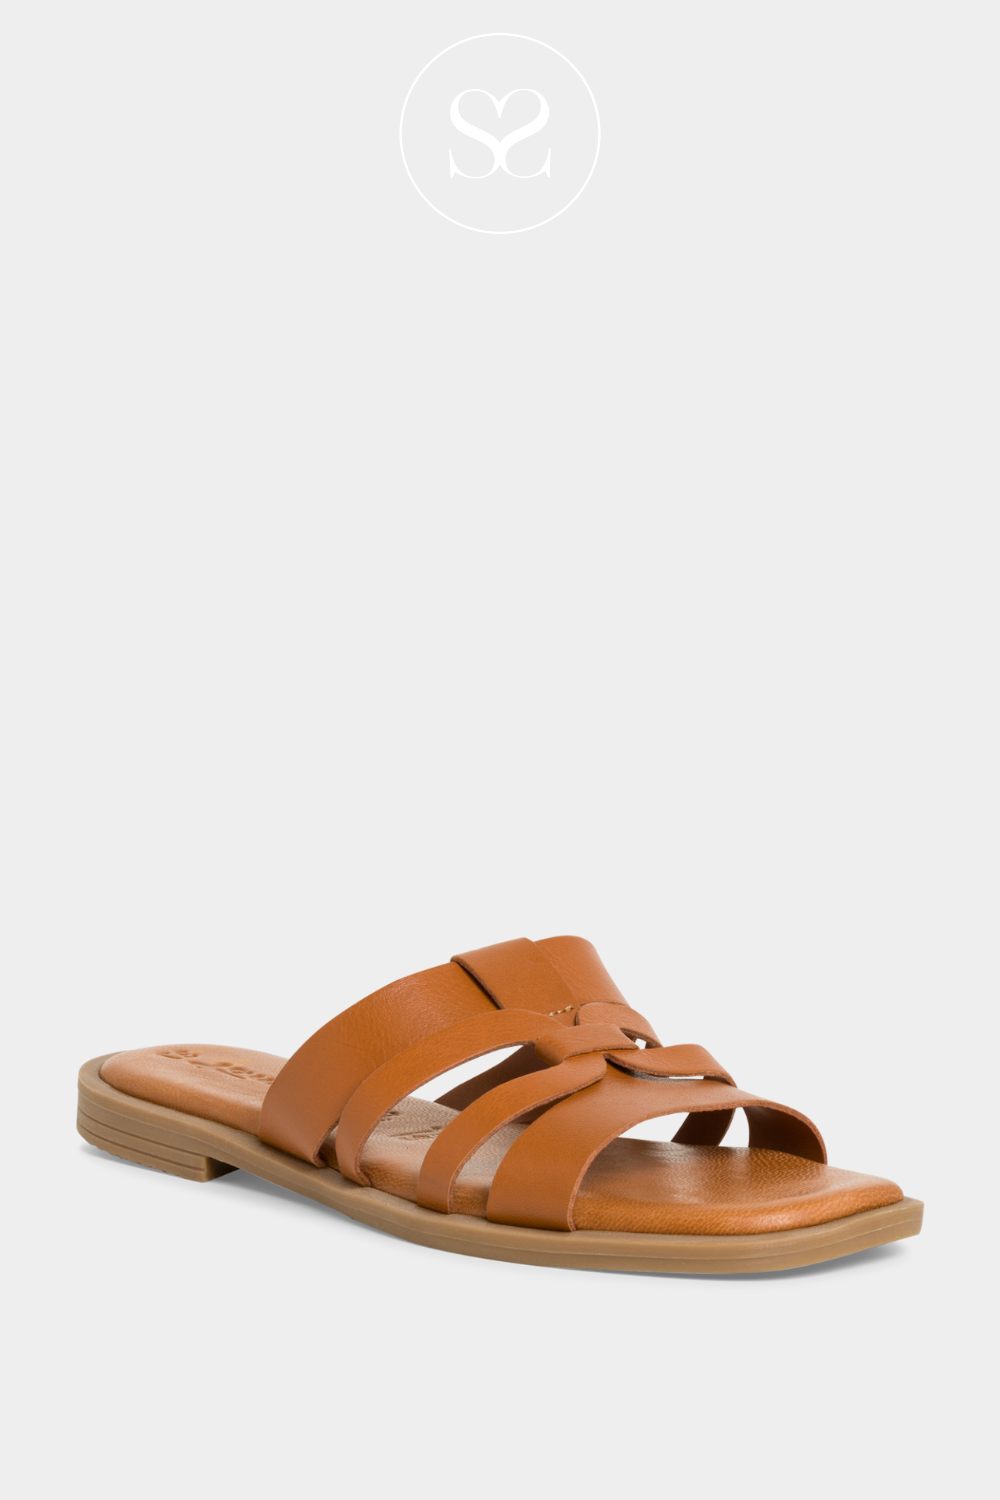 TAMARIS 1-27103-42 TAN FLAT SLIP ON SLIDER SANDALS WITH CUSHIONED SOLE AND GLADIATOR STYLE STRAPS